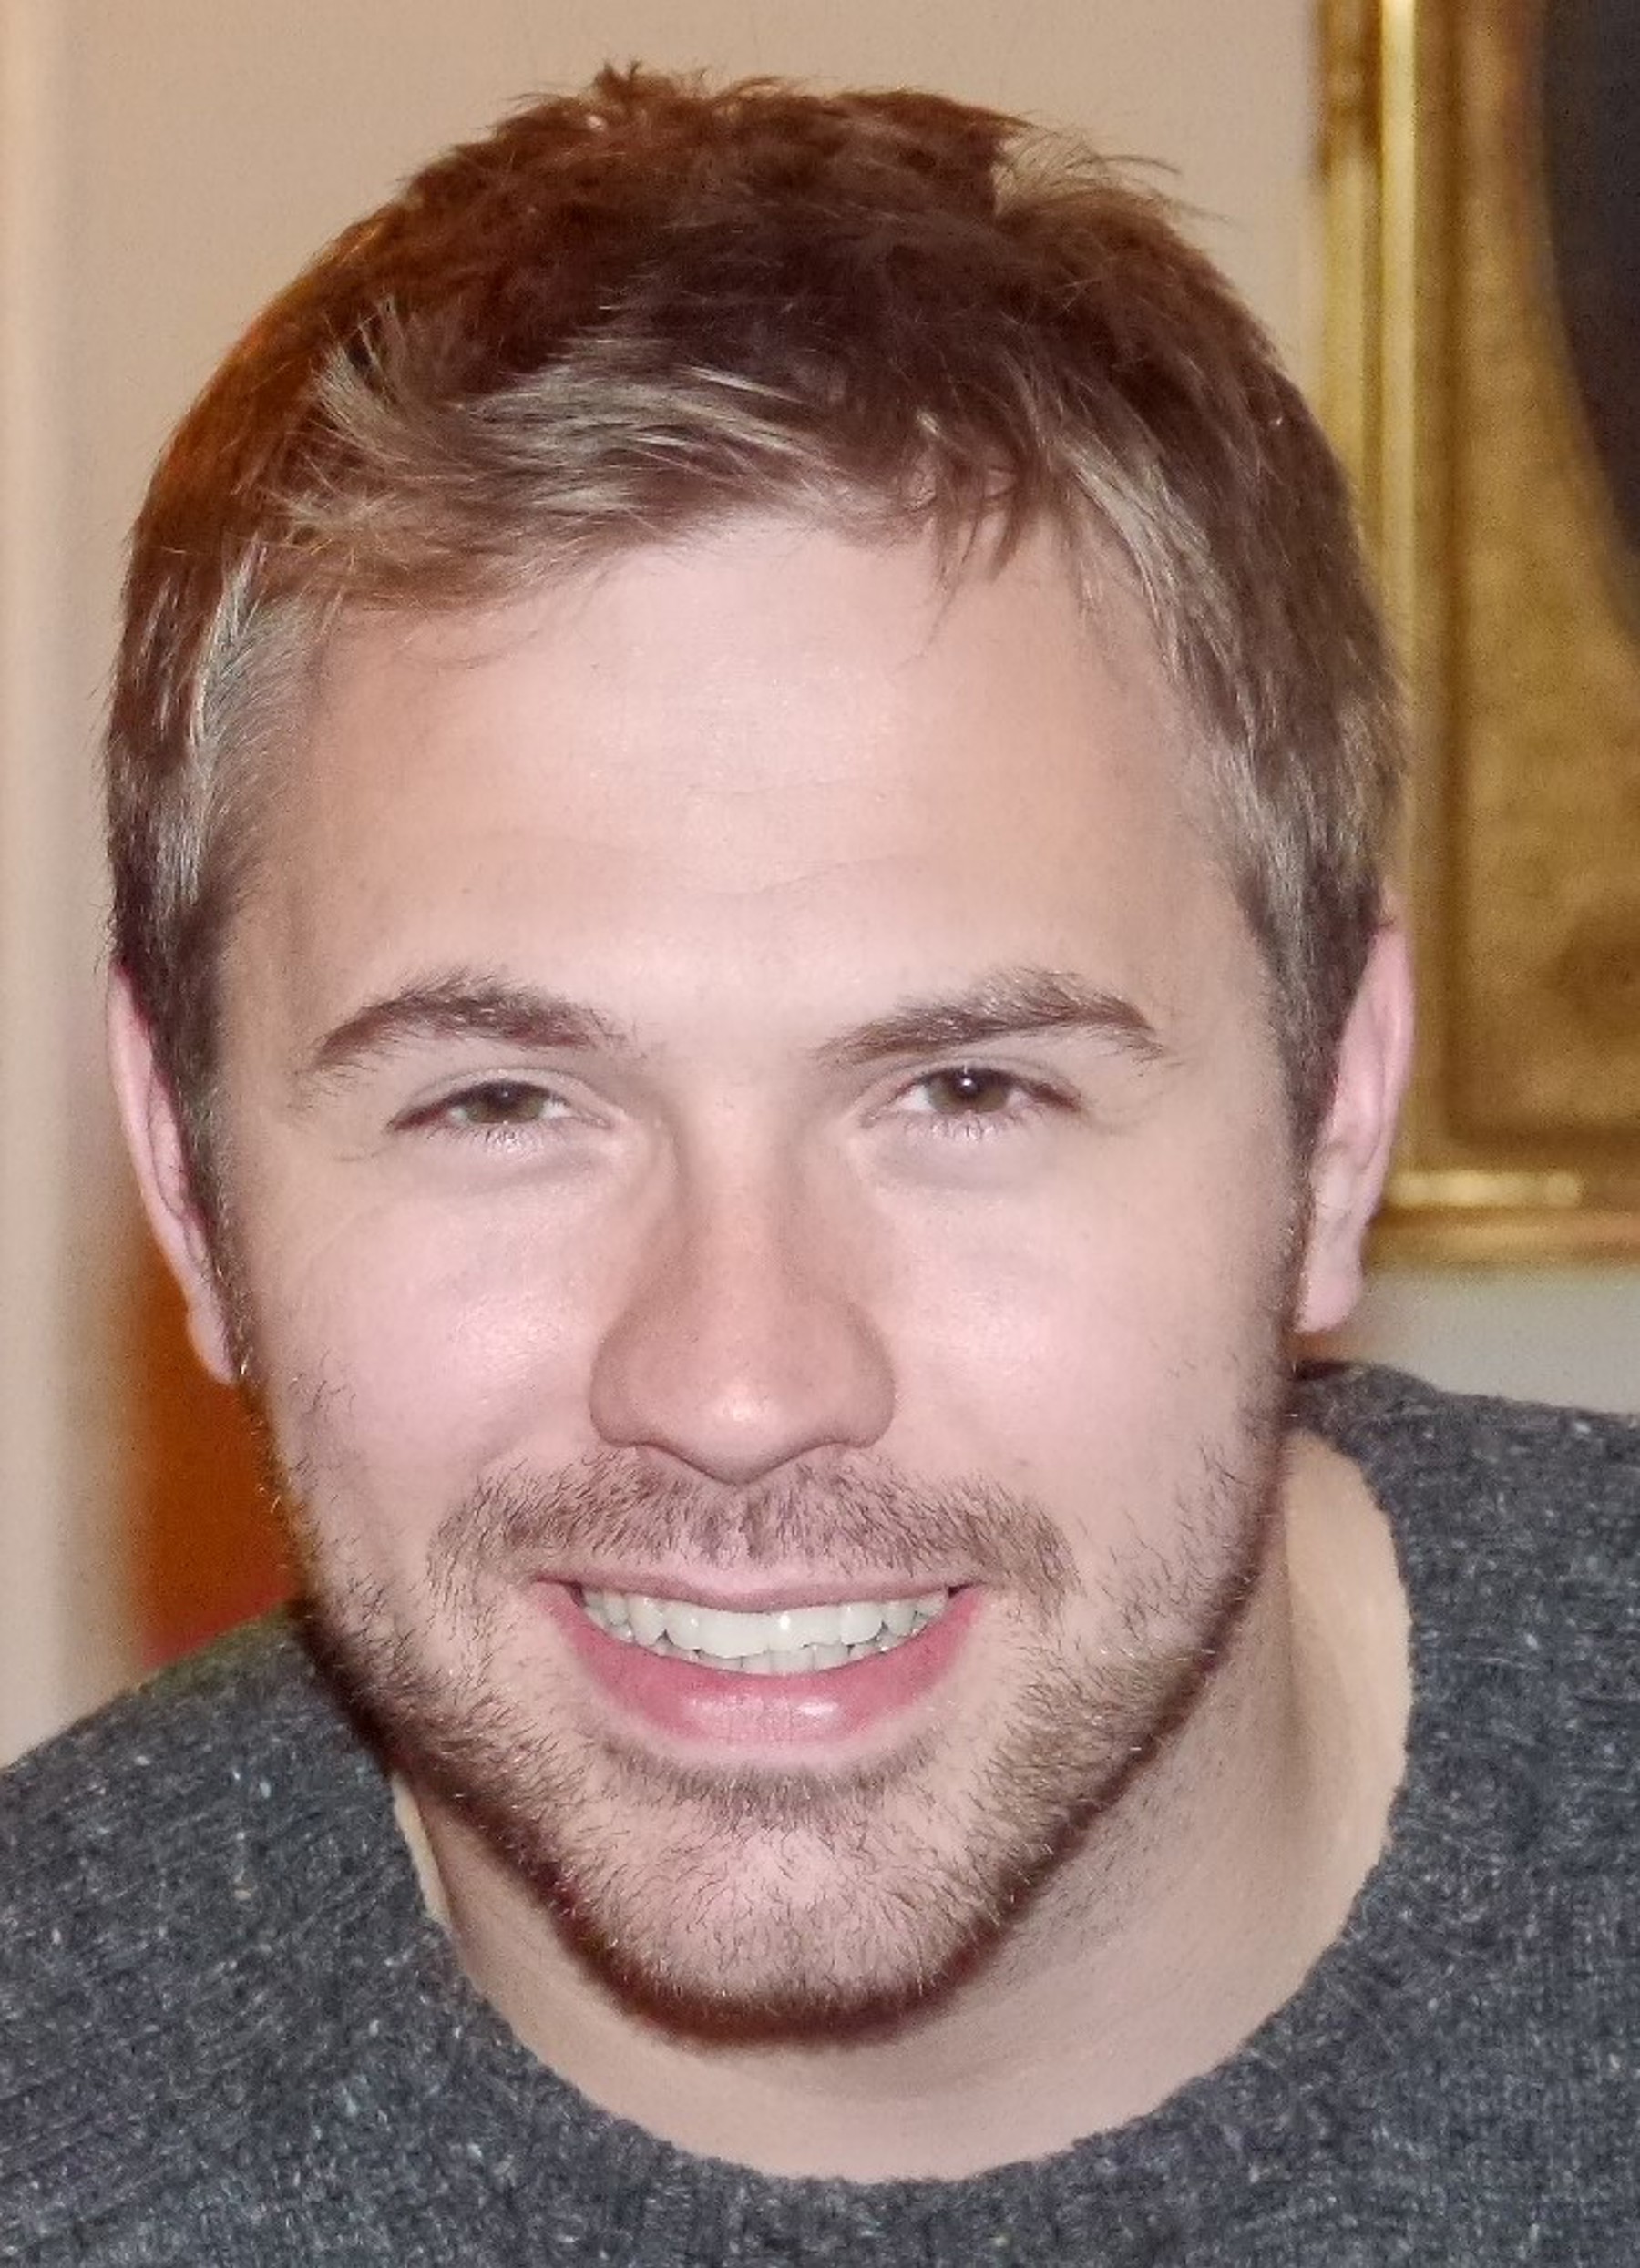 Liam Burns smiling at the camera while wearing a grey jumper